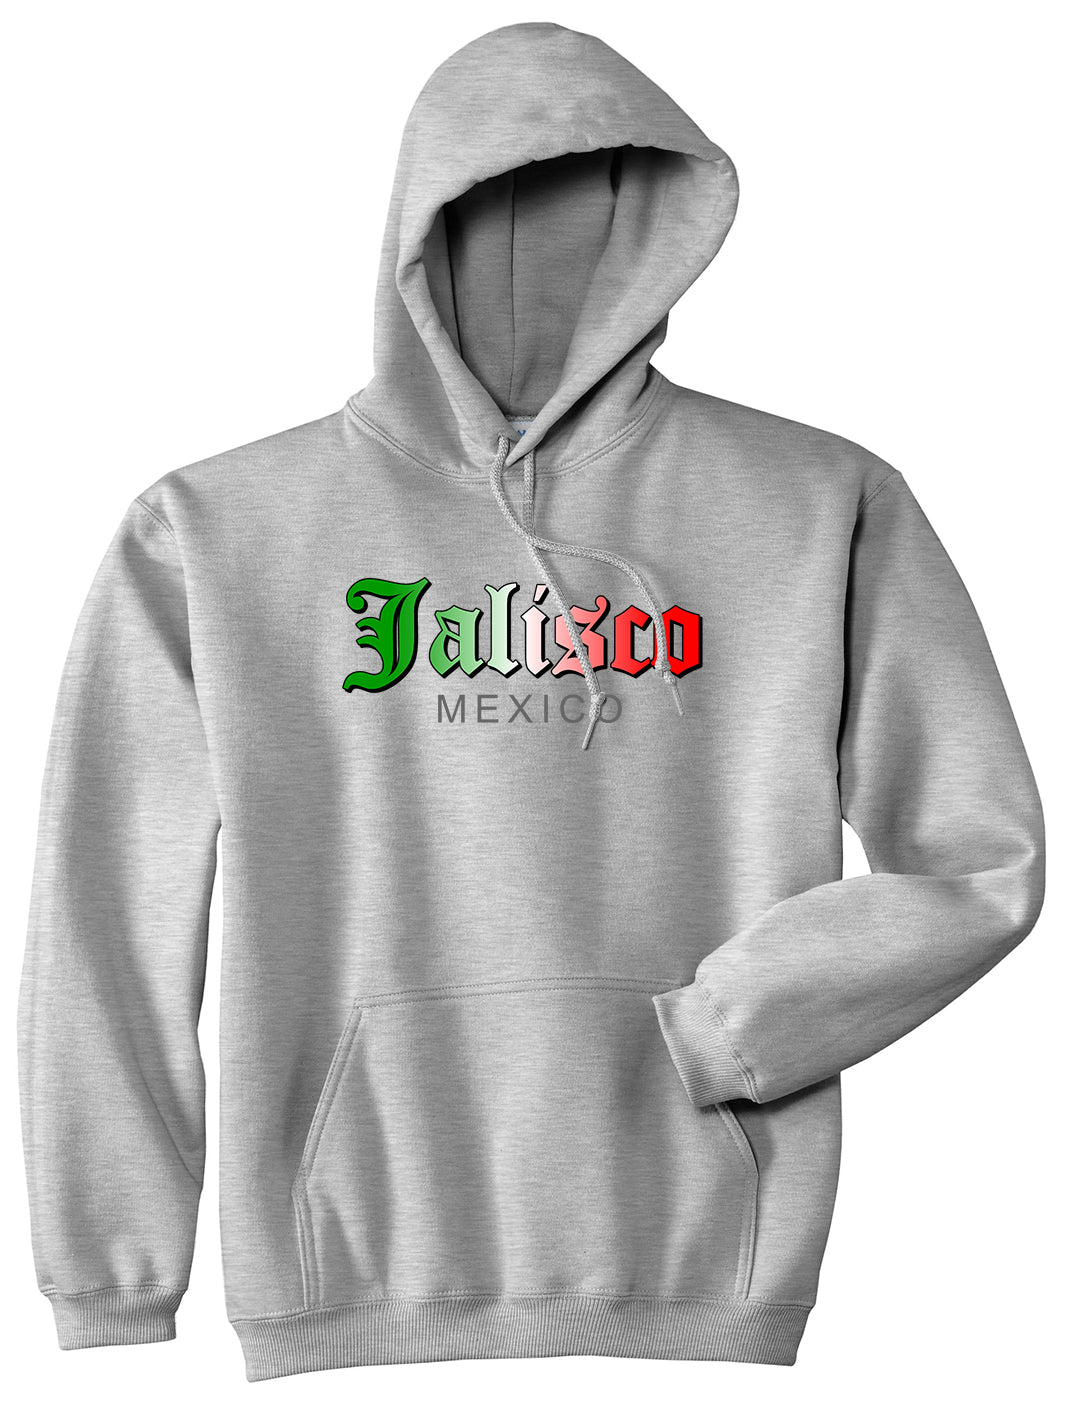 Jalisco Mexico Mens Pullover Hoodie Grey